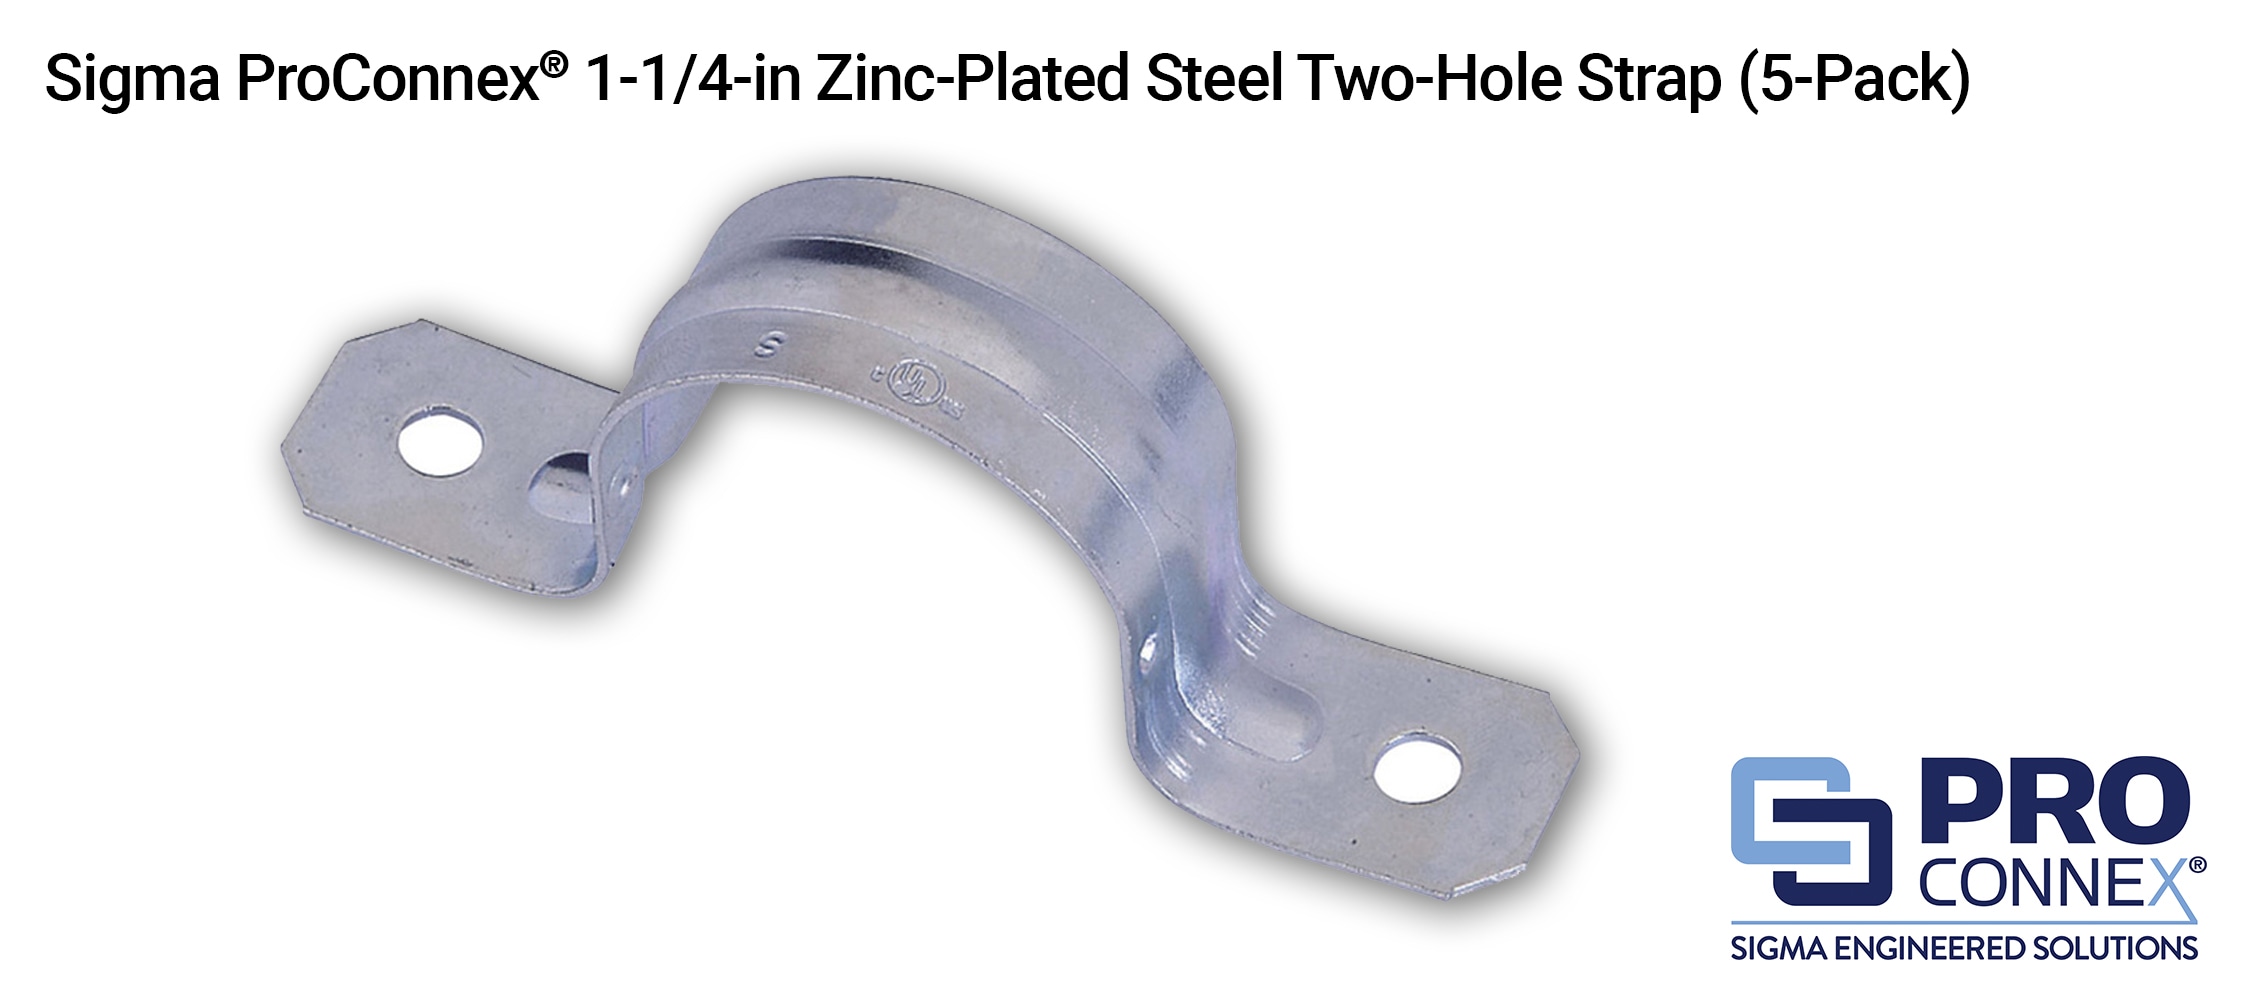 Sigma ProConnex 1-1/4-in Electrical (EMT) Zinc-plated Steel Two-hole Strap  Conduit Fittings (5-Pack)